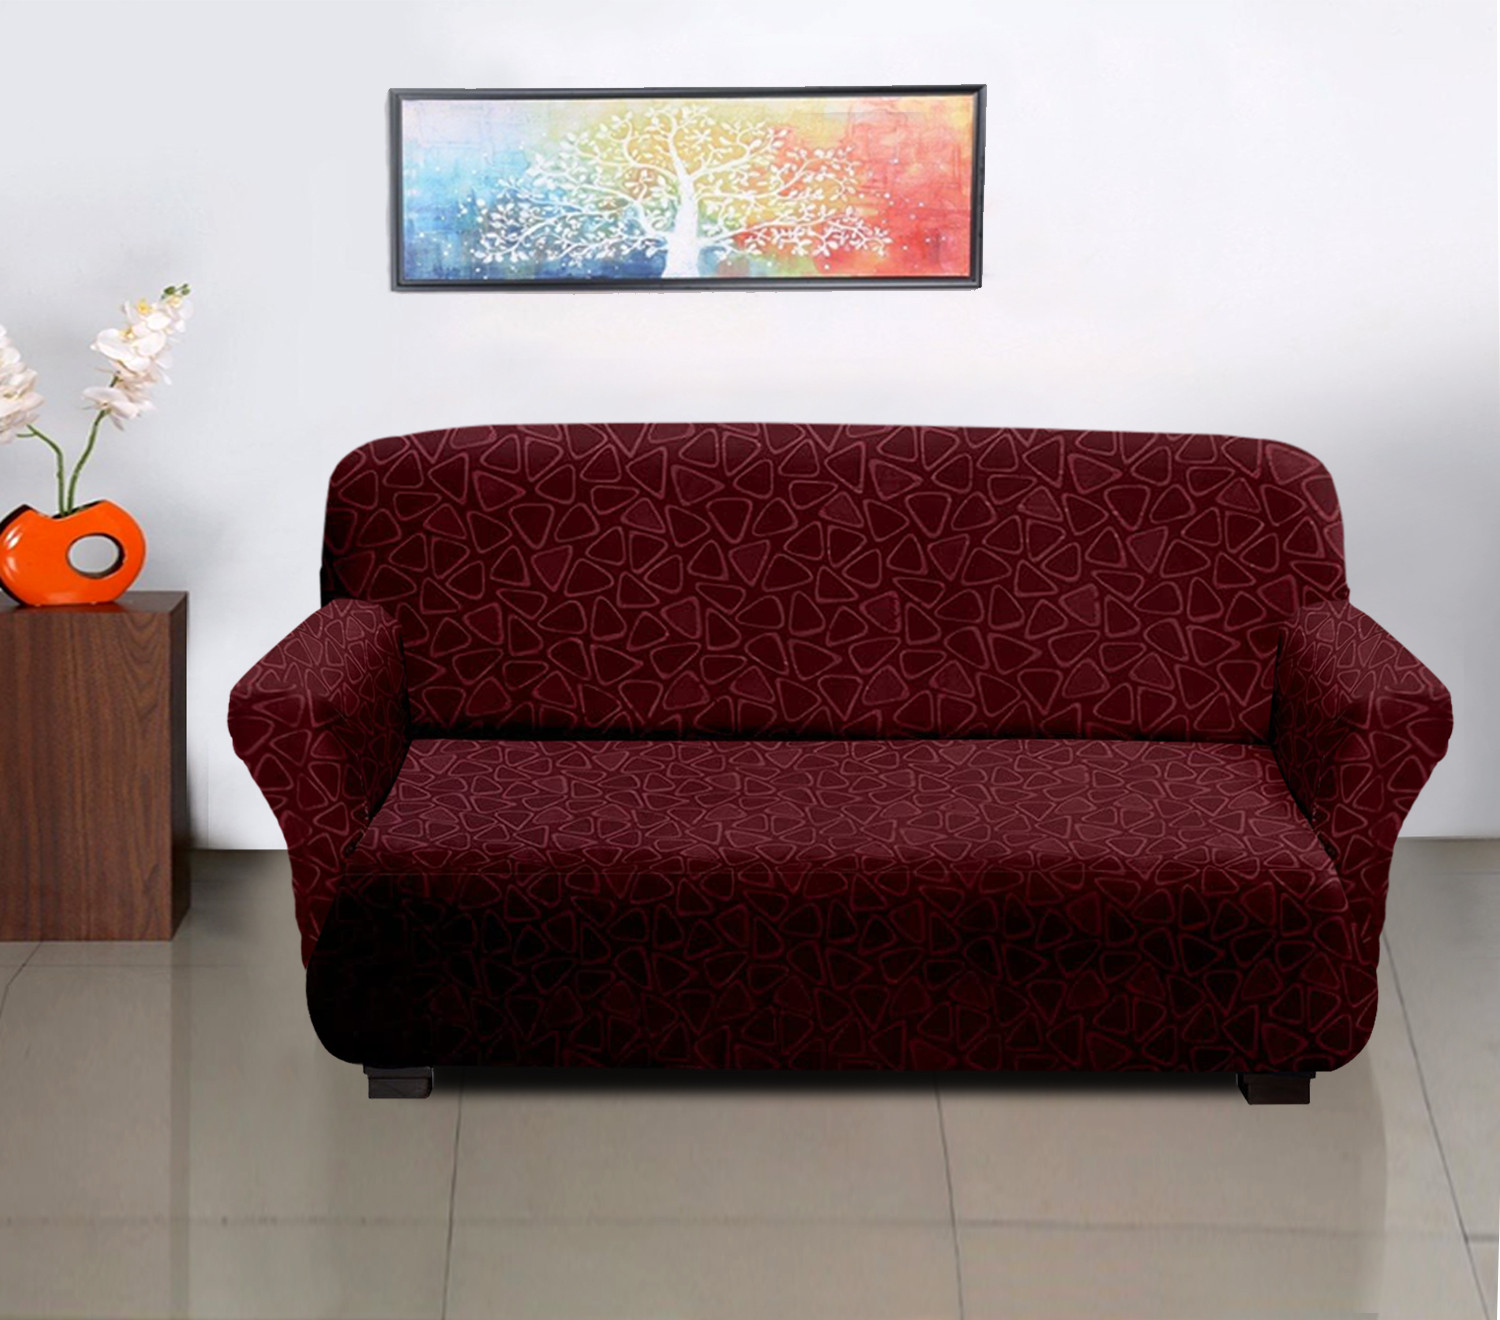 Kuber Industries Triangle Printed Stretchable, Non-Slip Polyster 3 Seater Sofa Cover/Slipcover/Protector With Foam Stick (Maroon)